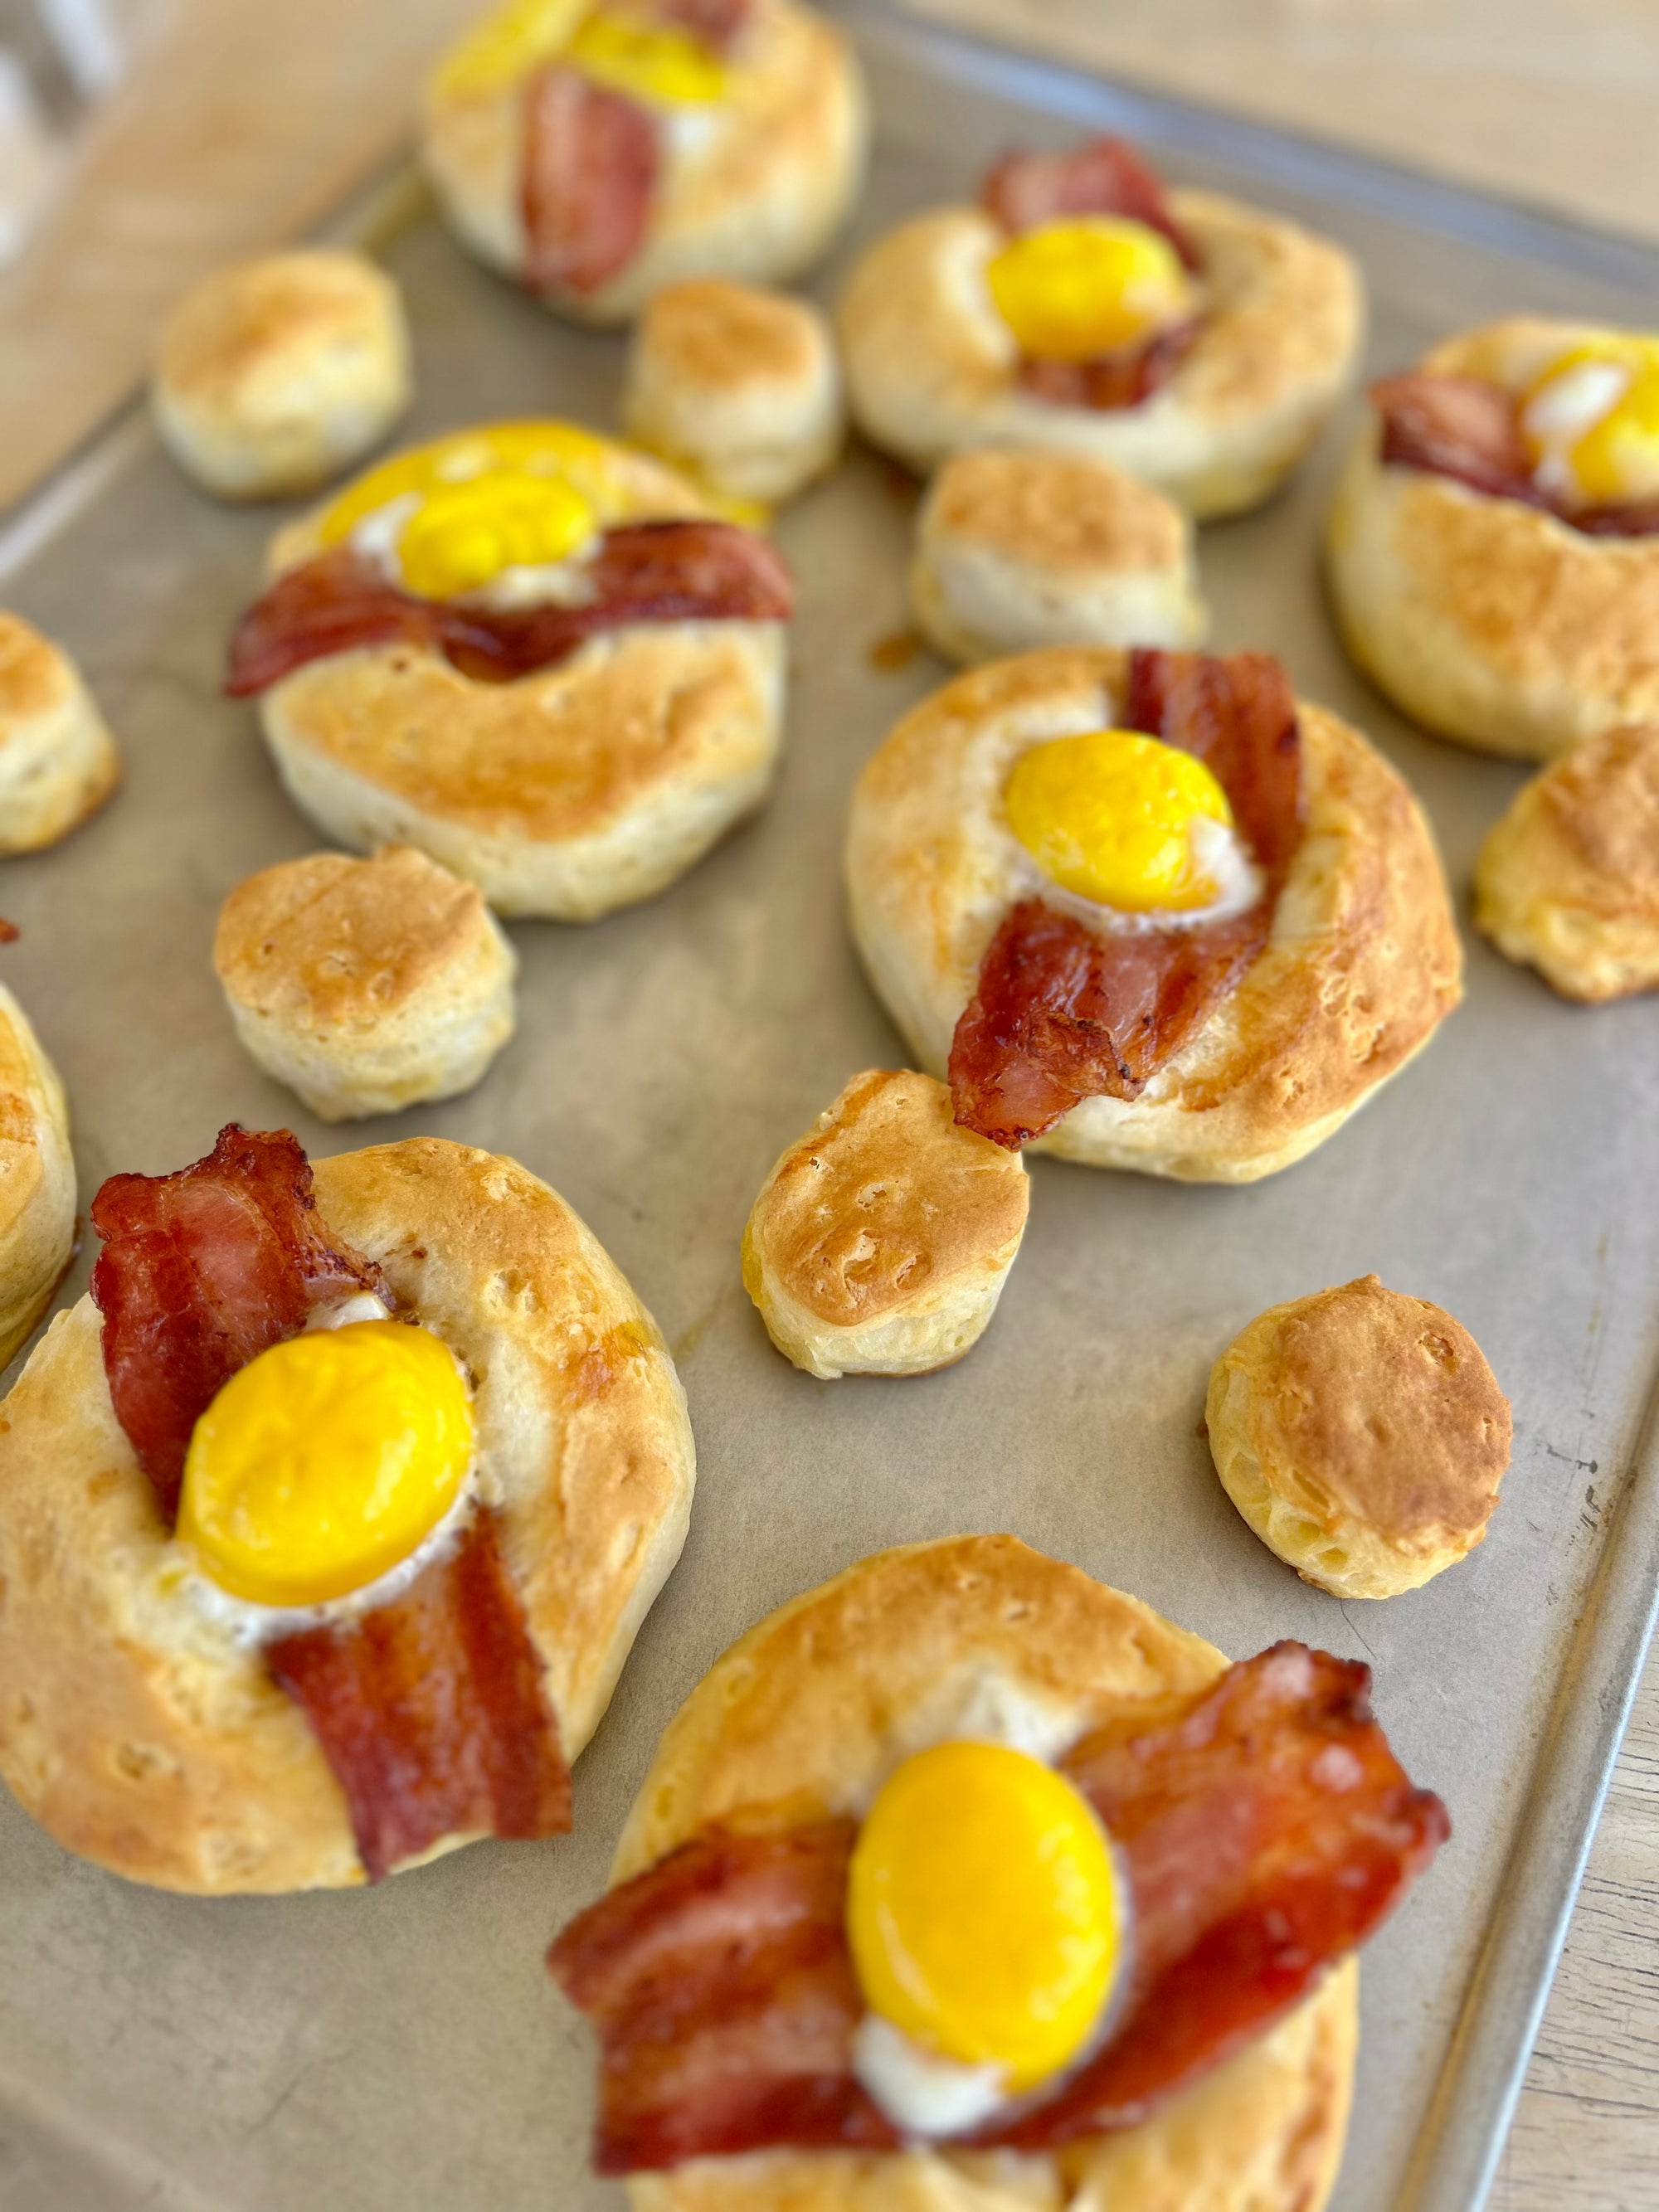 Bacon & Egg Holy Biscuits